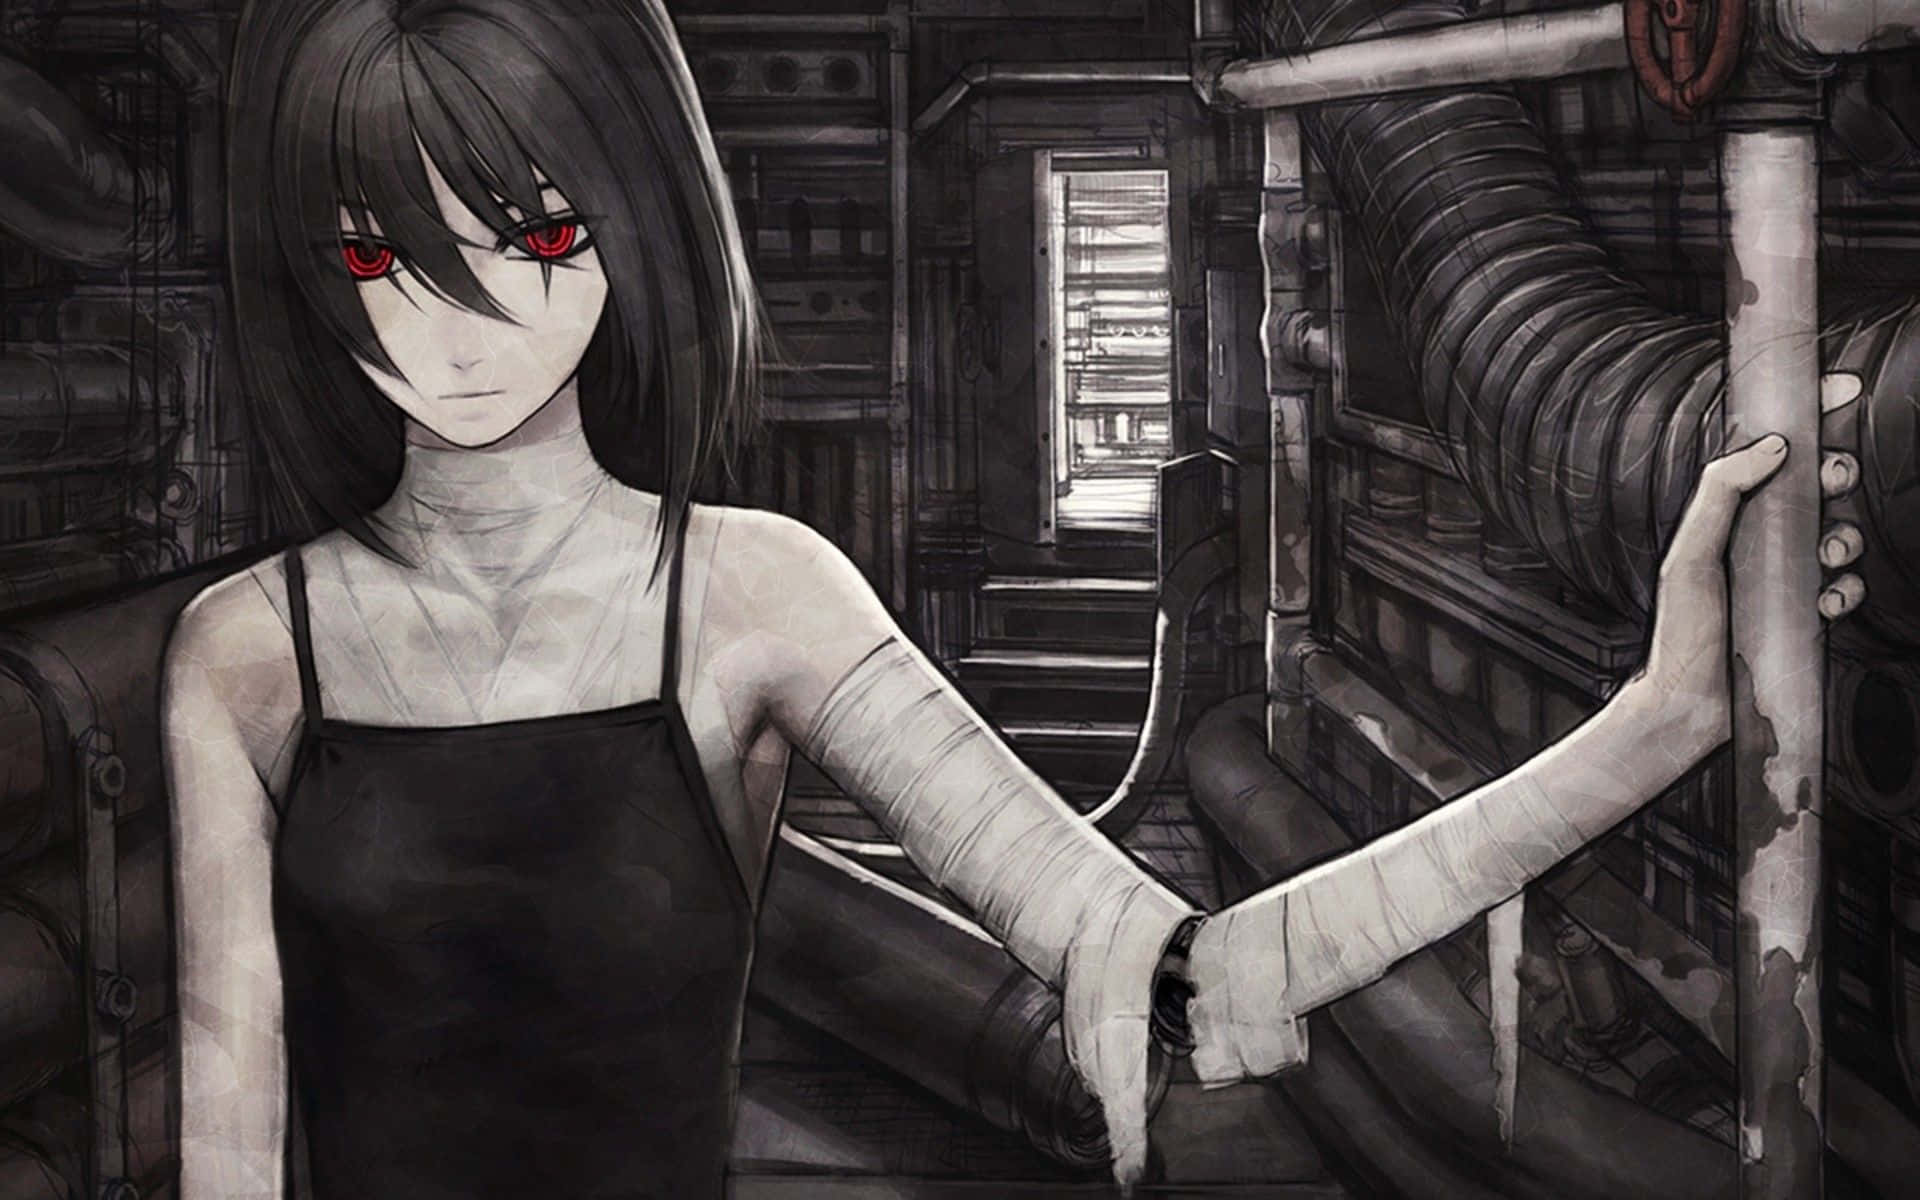 Unholy fear awaits in this horror anime" Wallpaper